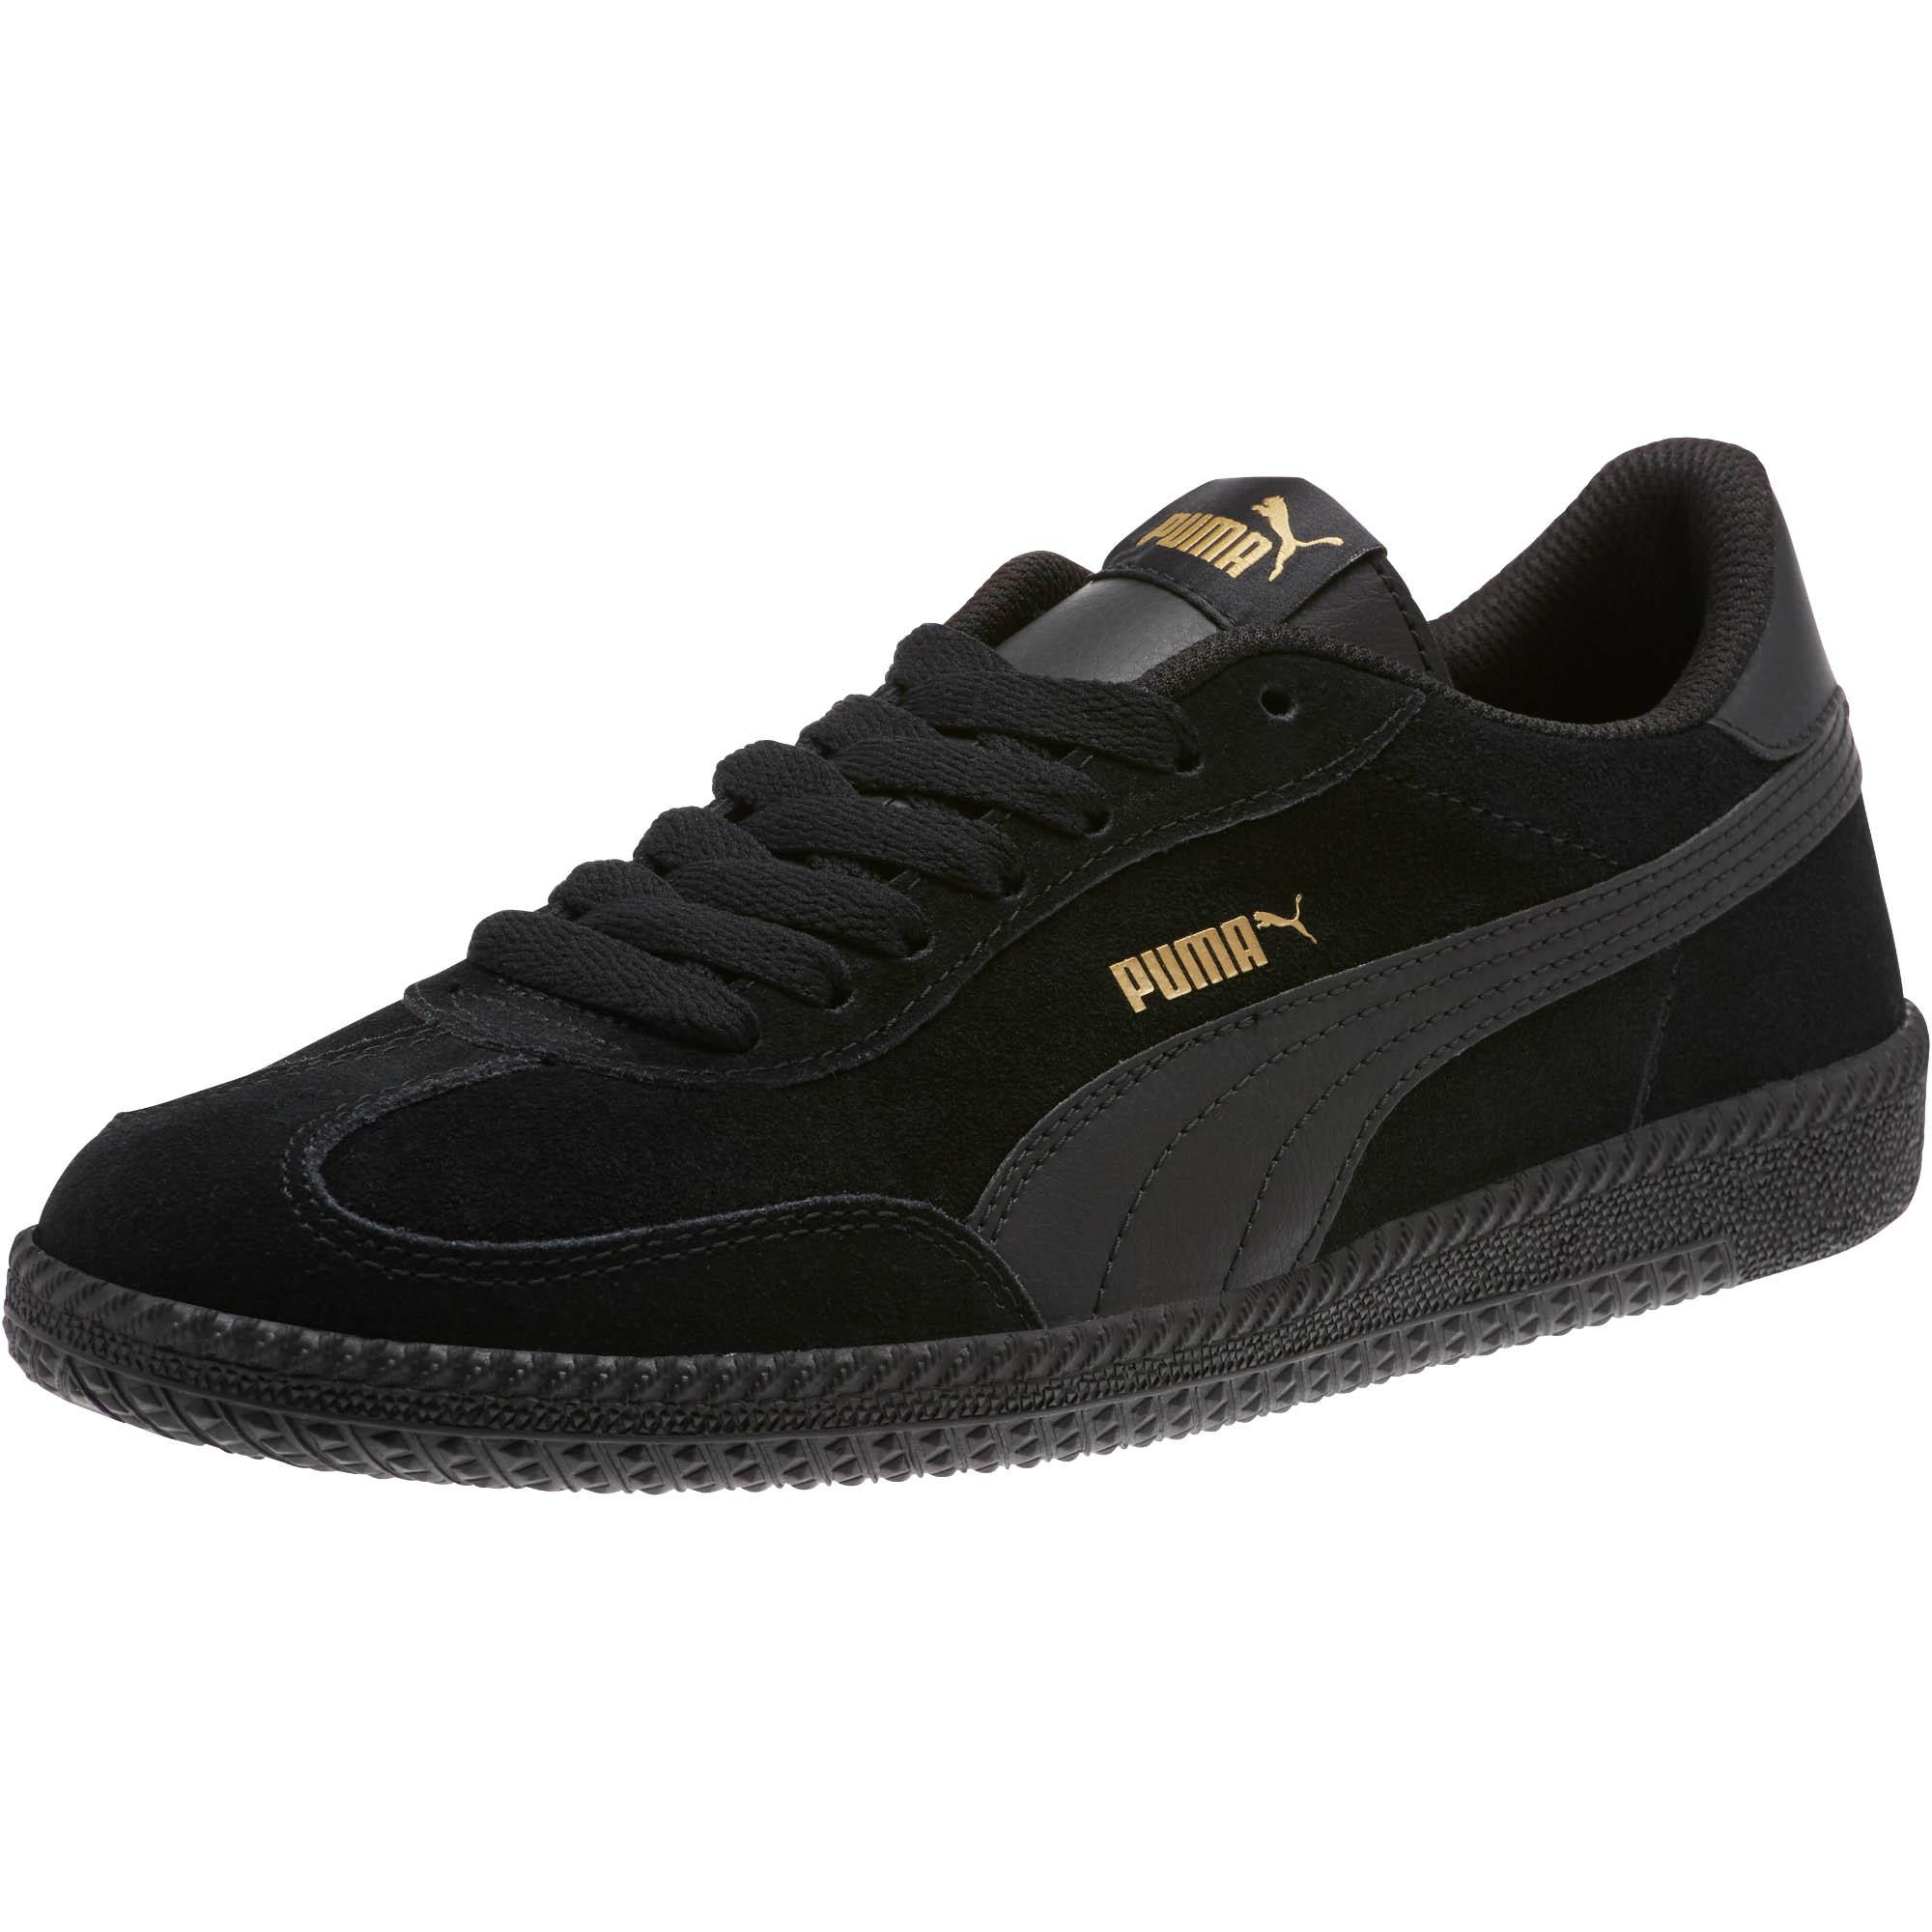 PUMA Astro Cup Suede Sneakers in 05 (Black) for Men - Lyst